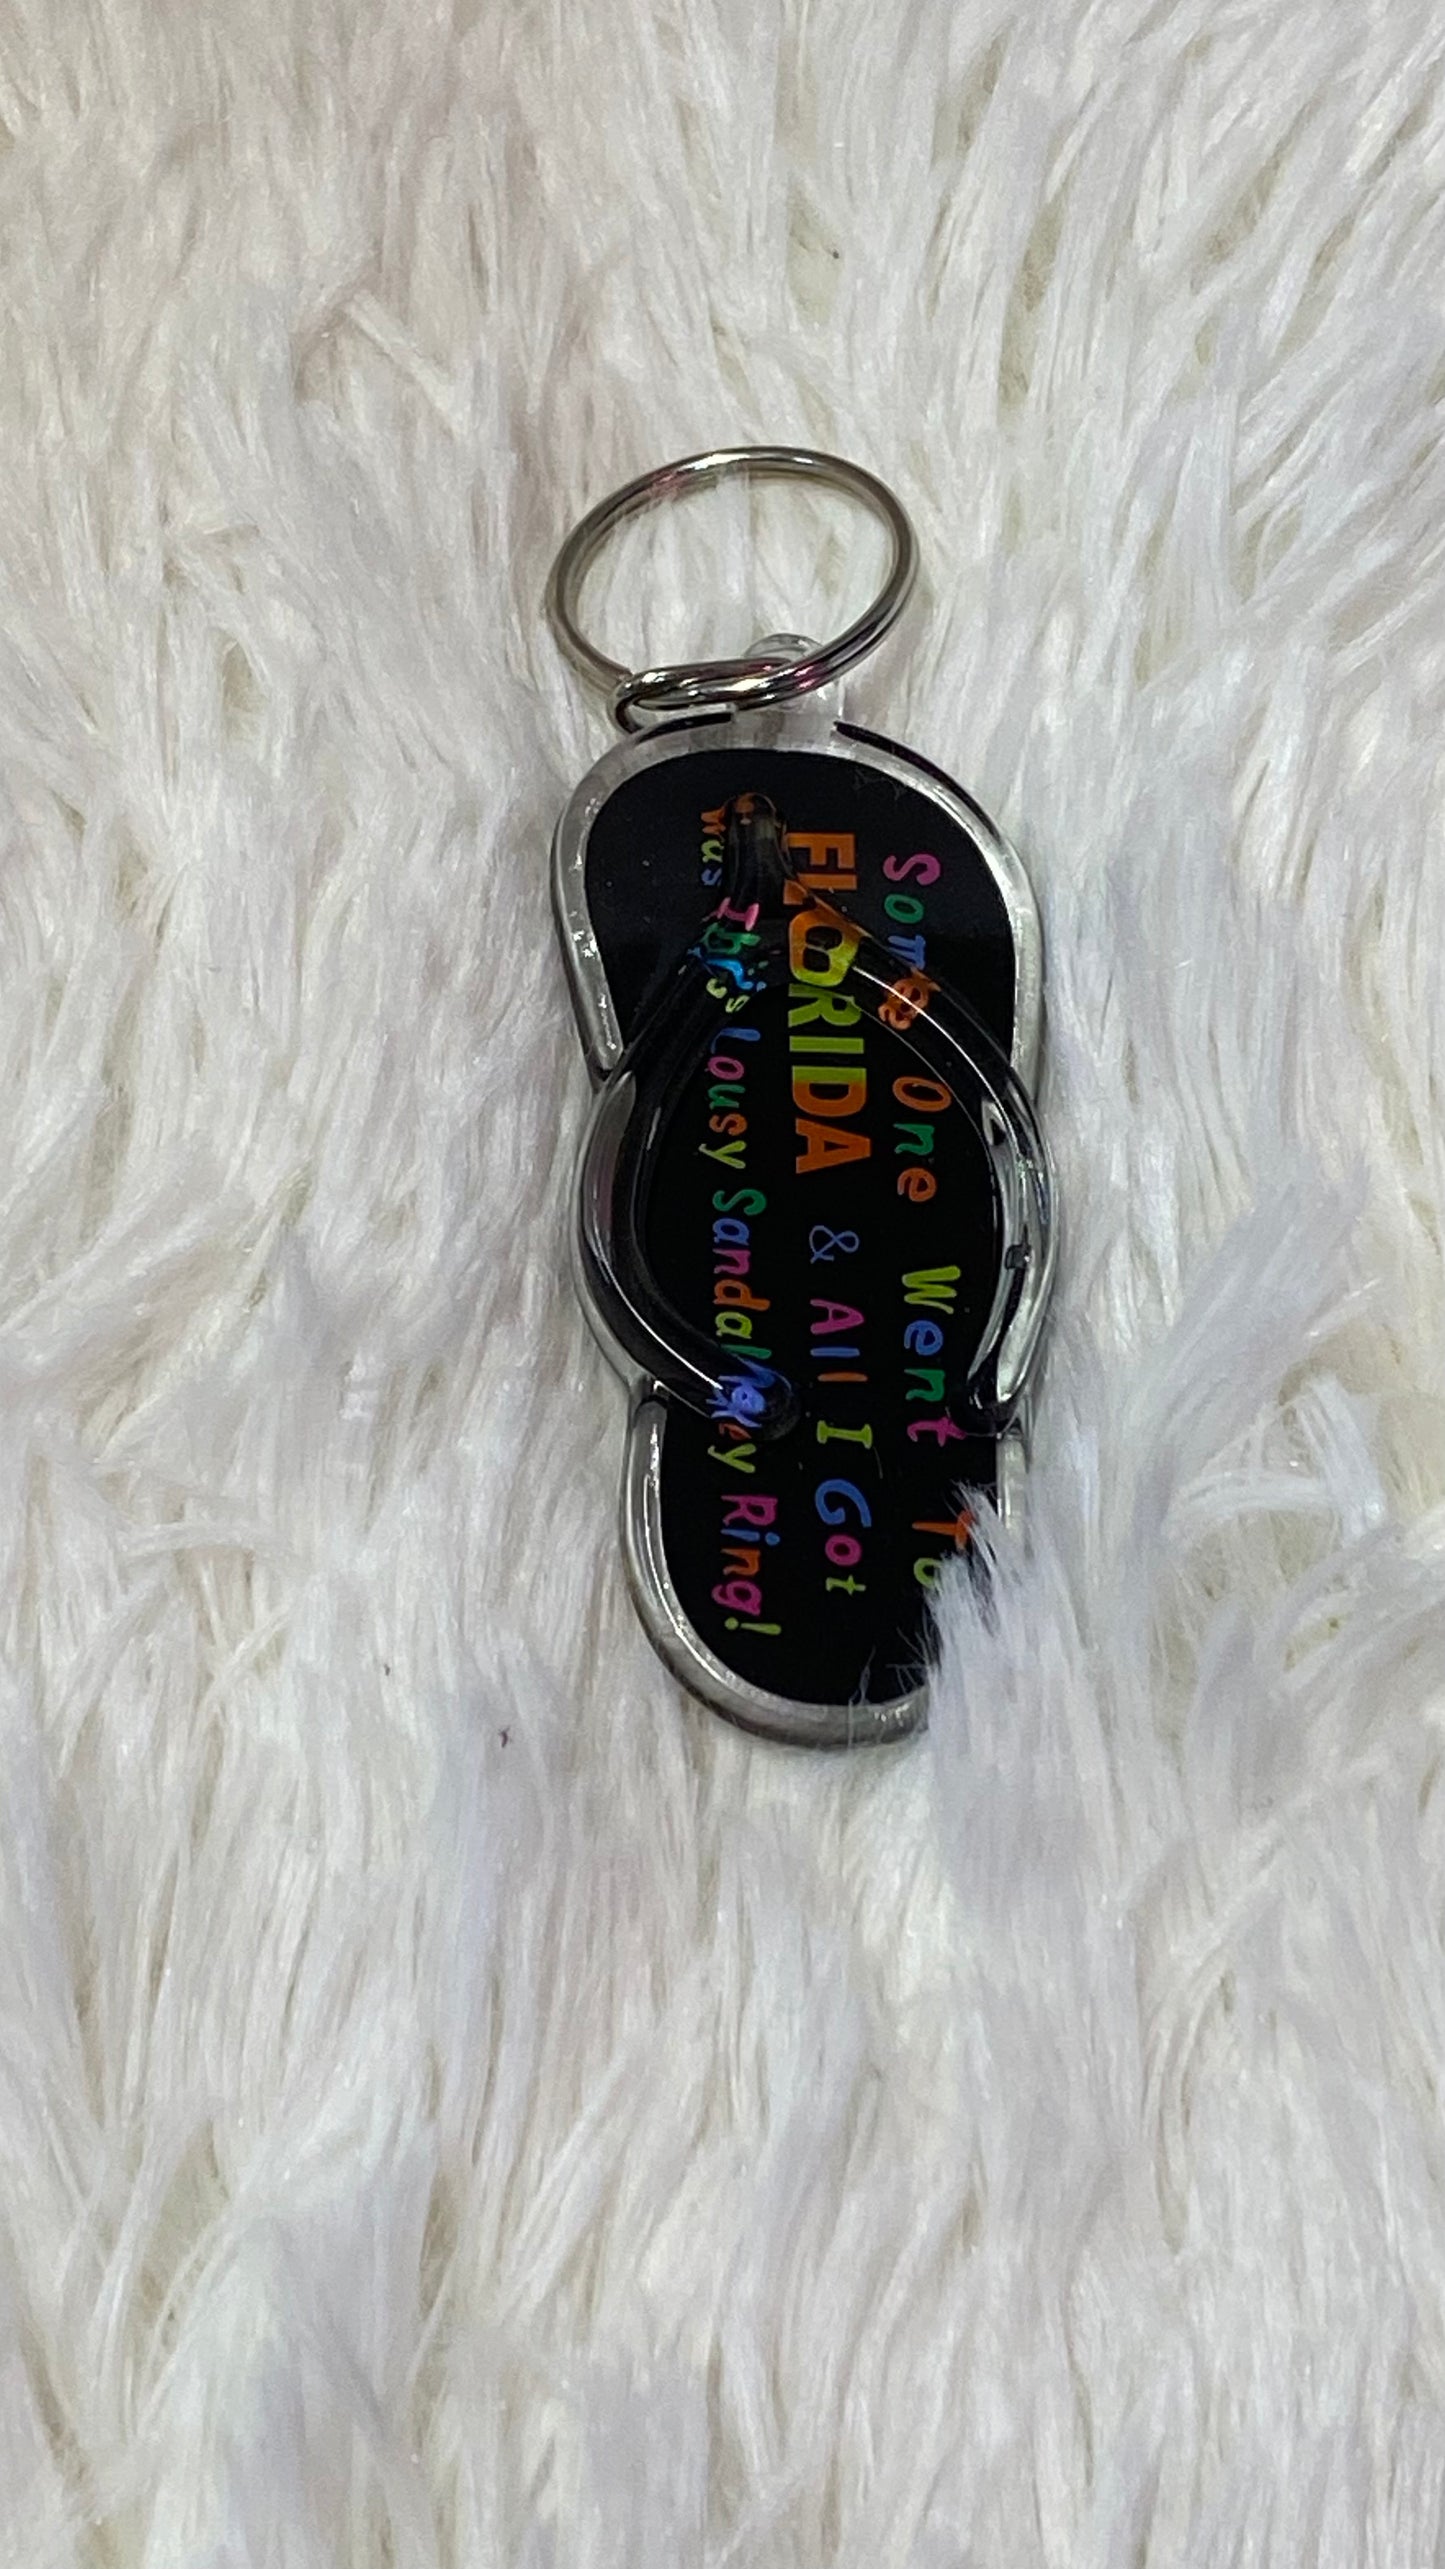 All I got was this lousy keychain Florida Souvenirs Flip Flop KeyChain